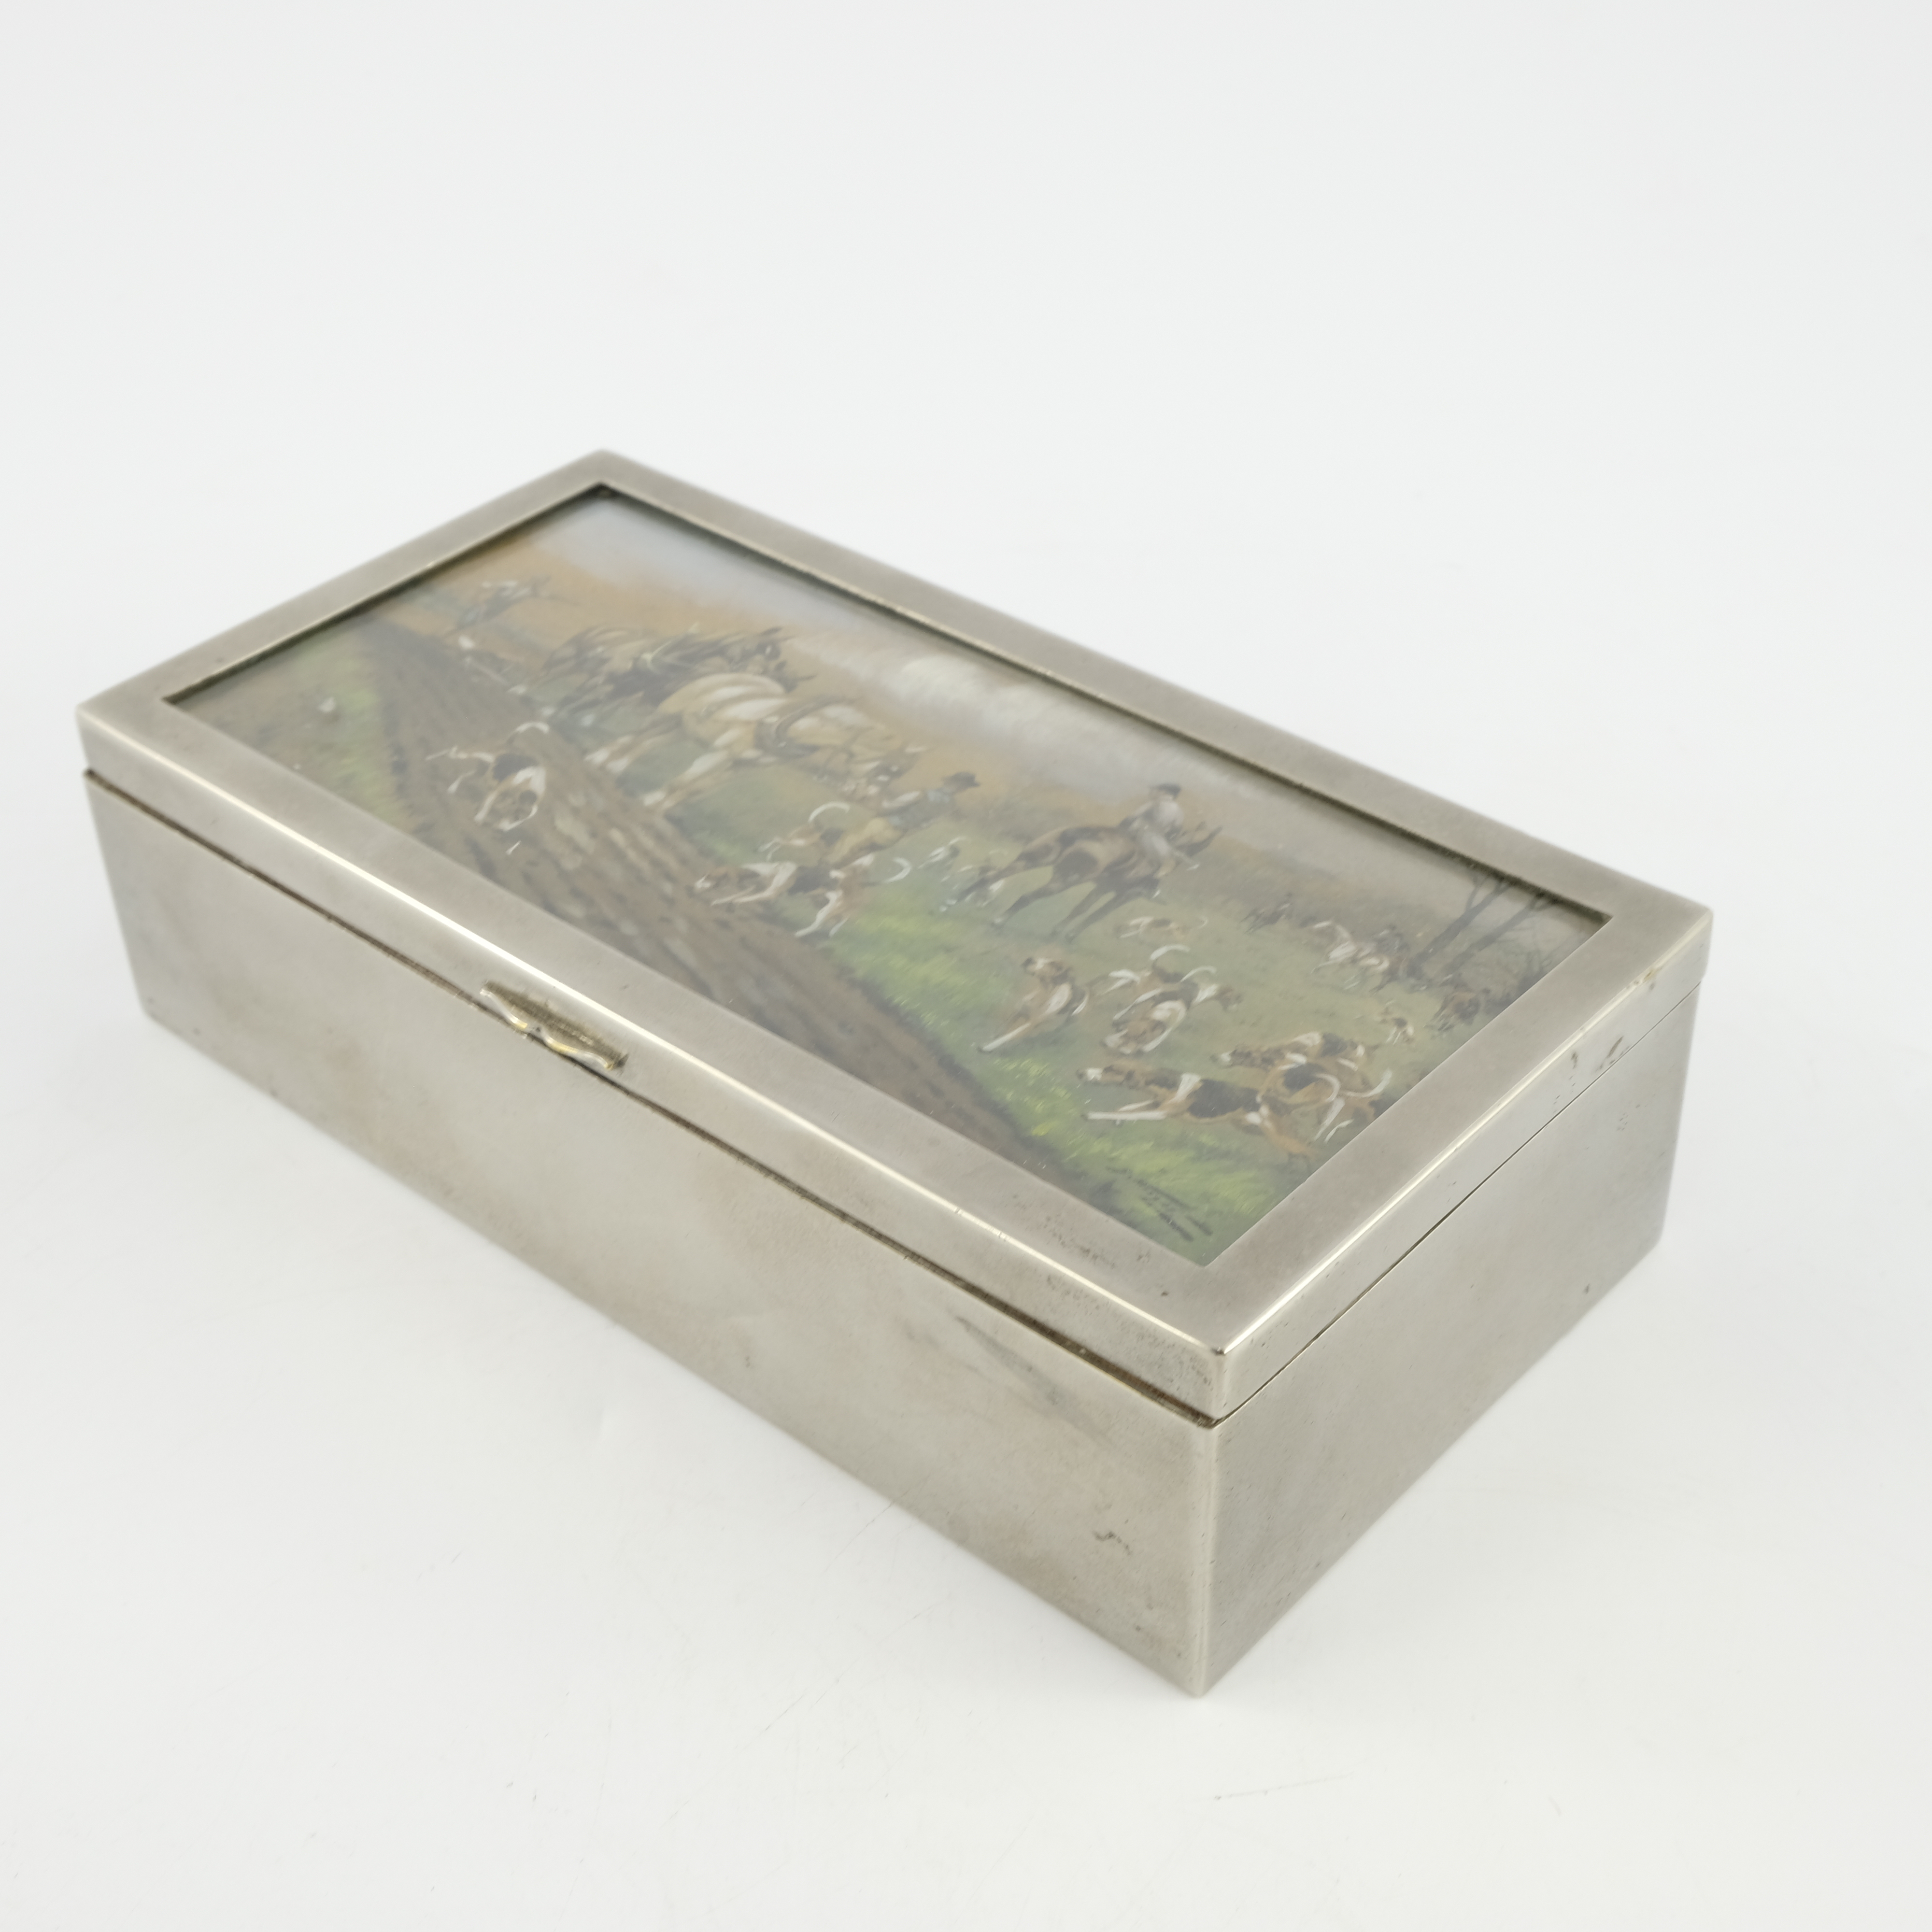 An Edwardian electroplated table cigarette casket of hunting interest, the cover with an inset - Image 2 of 4